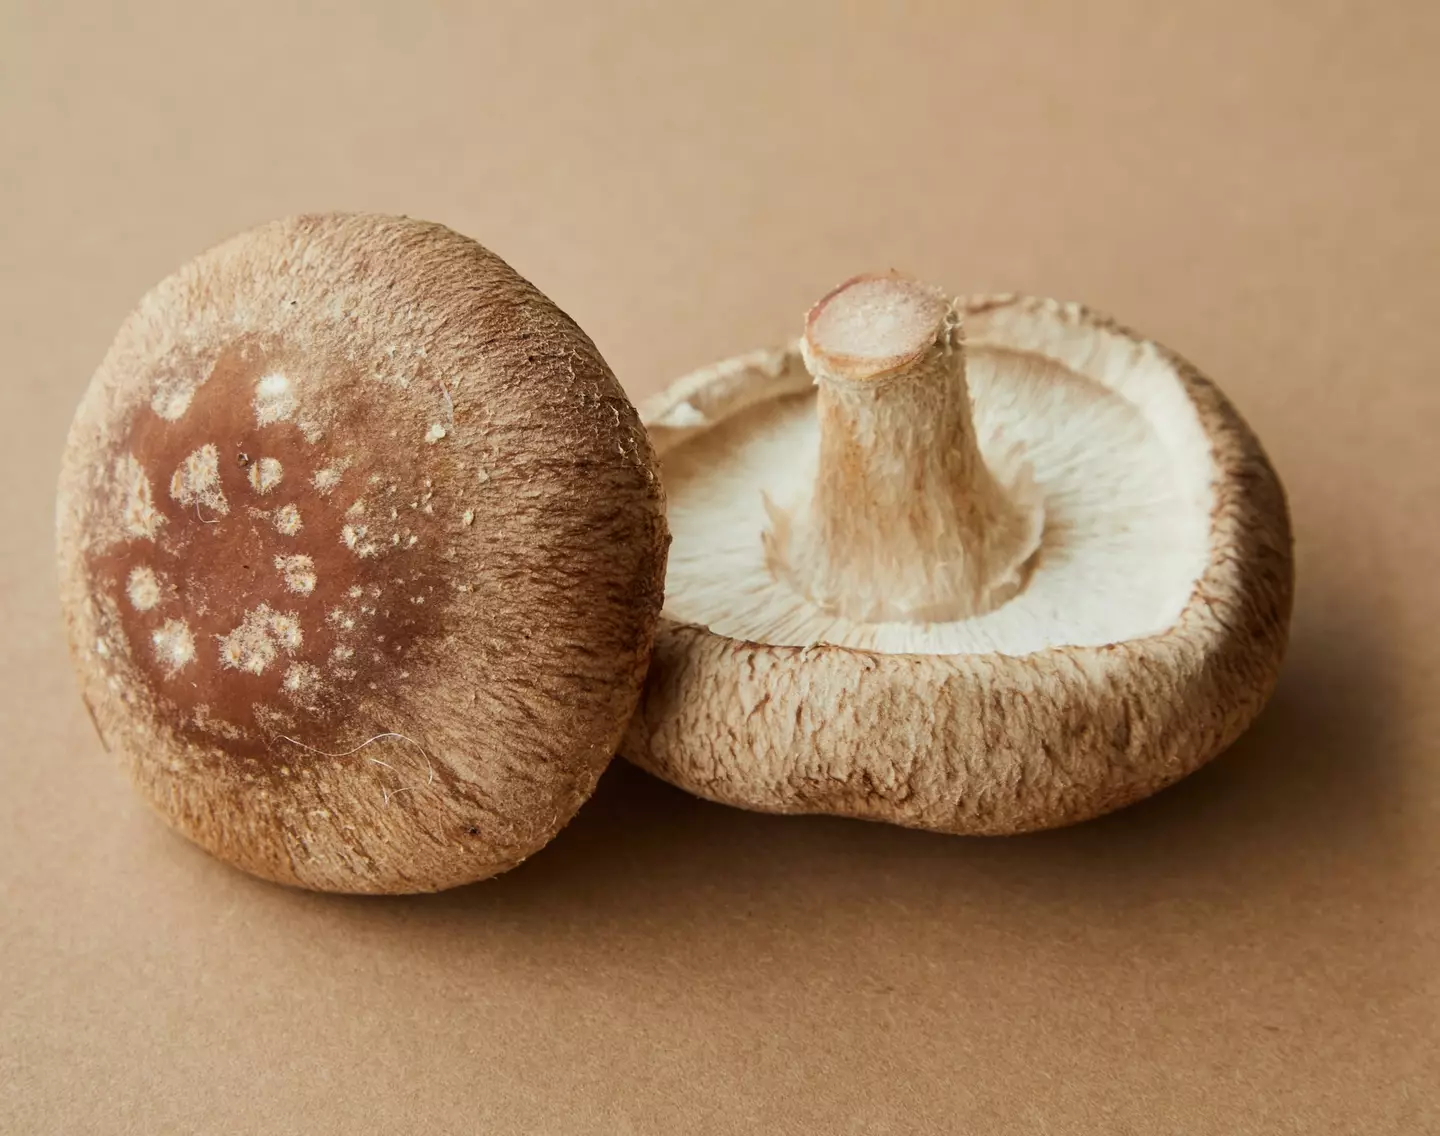 Shiitake mushrooms can sometimes cause a nasty reaction if eaten undercooked.